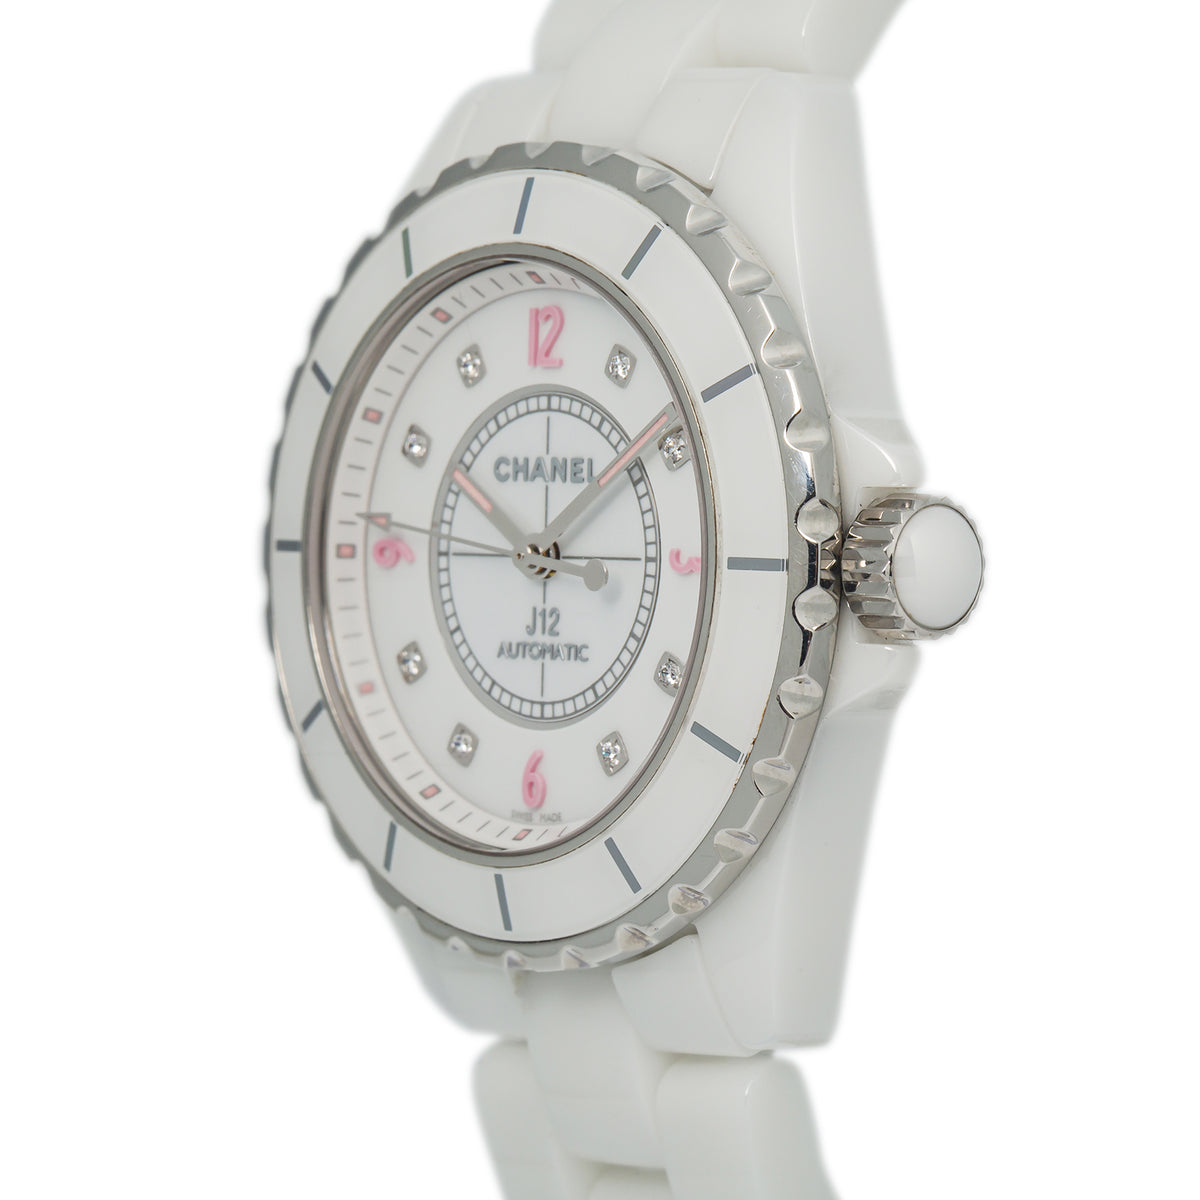 Chanel J12 H4864 Limited Edition White Ceramic Pink Light Automatic Watch 38mm